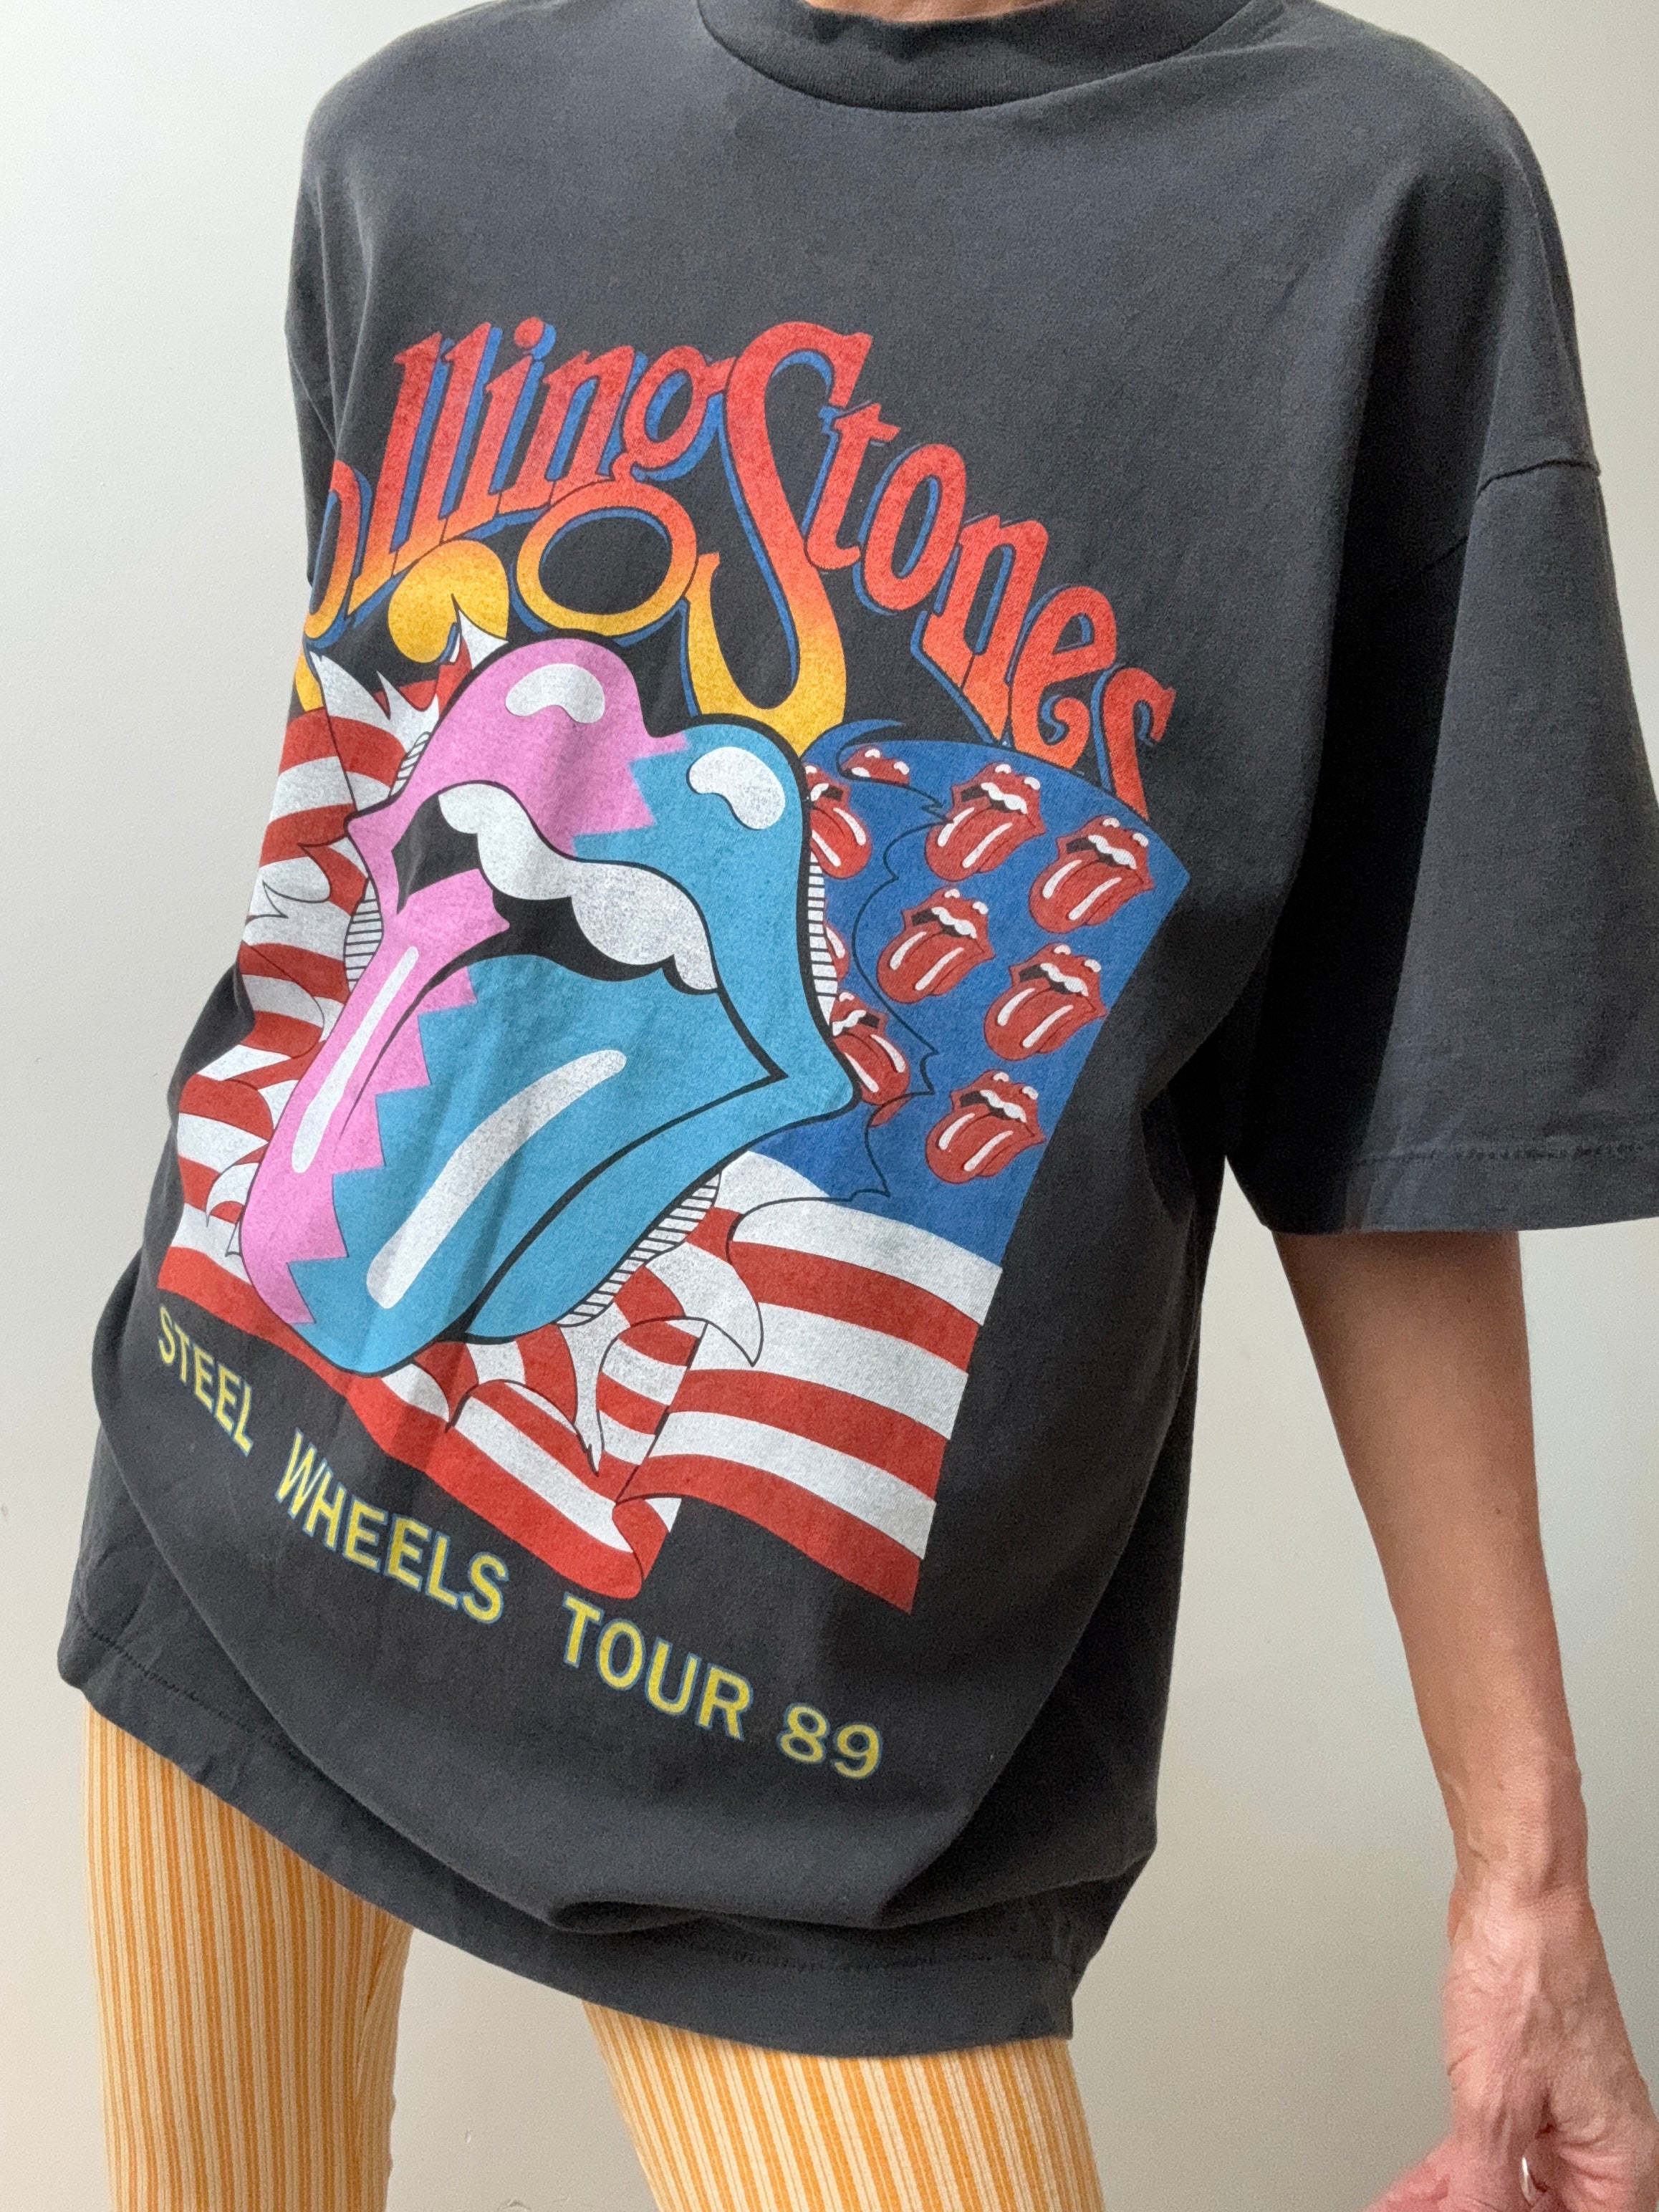 Future Nomads Tops Vintage Style Tee Rolling Stones